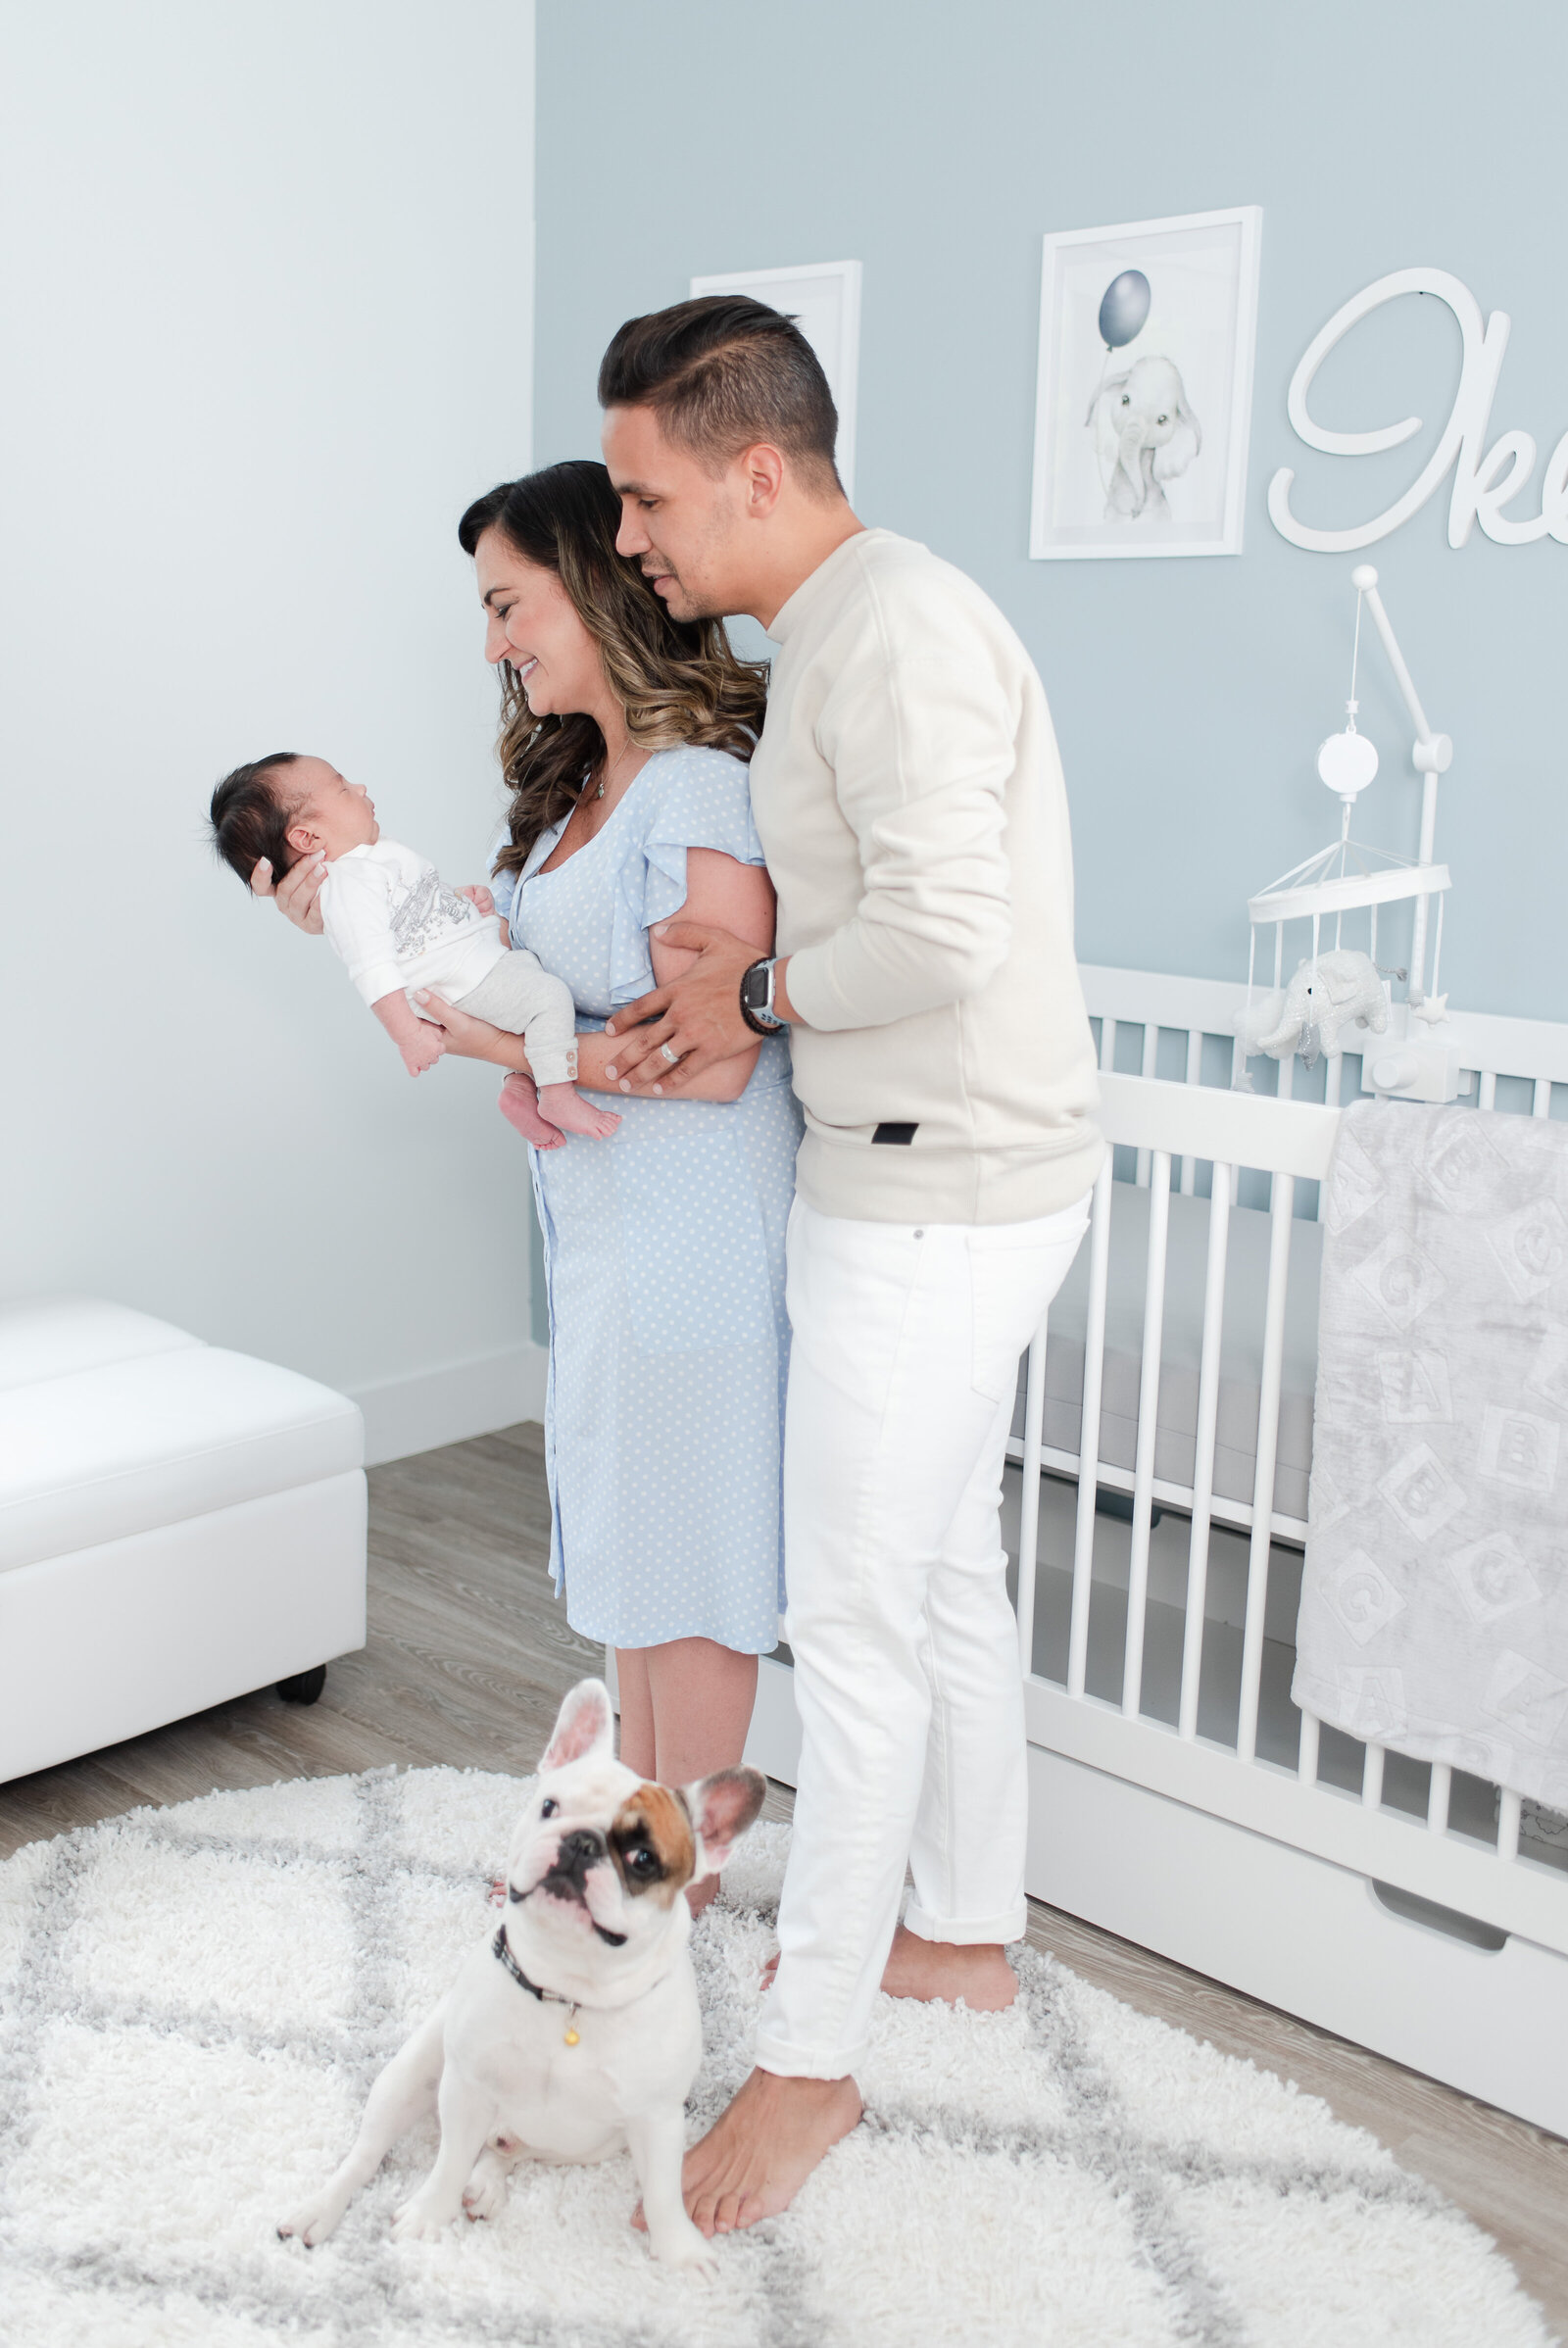 mom dad frenchie puppy and newborn baby boy session in blue animal themed nursery in doral fl by Miami Lifestyle Photographers David and Meivys of MSP Photography